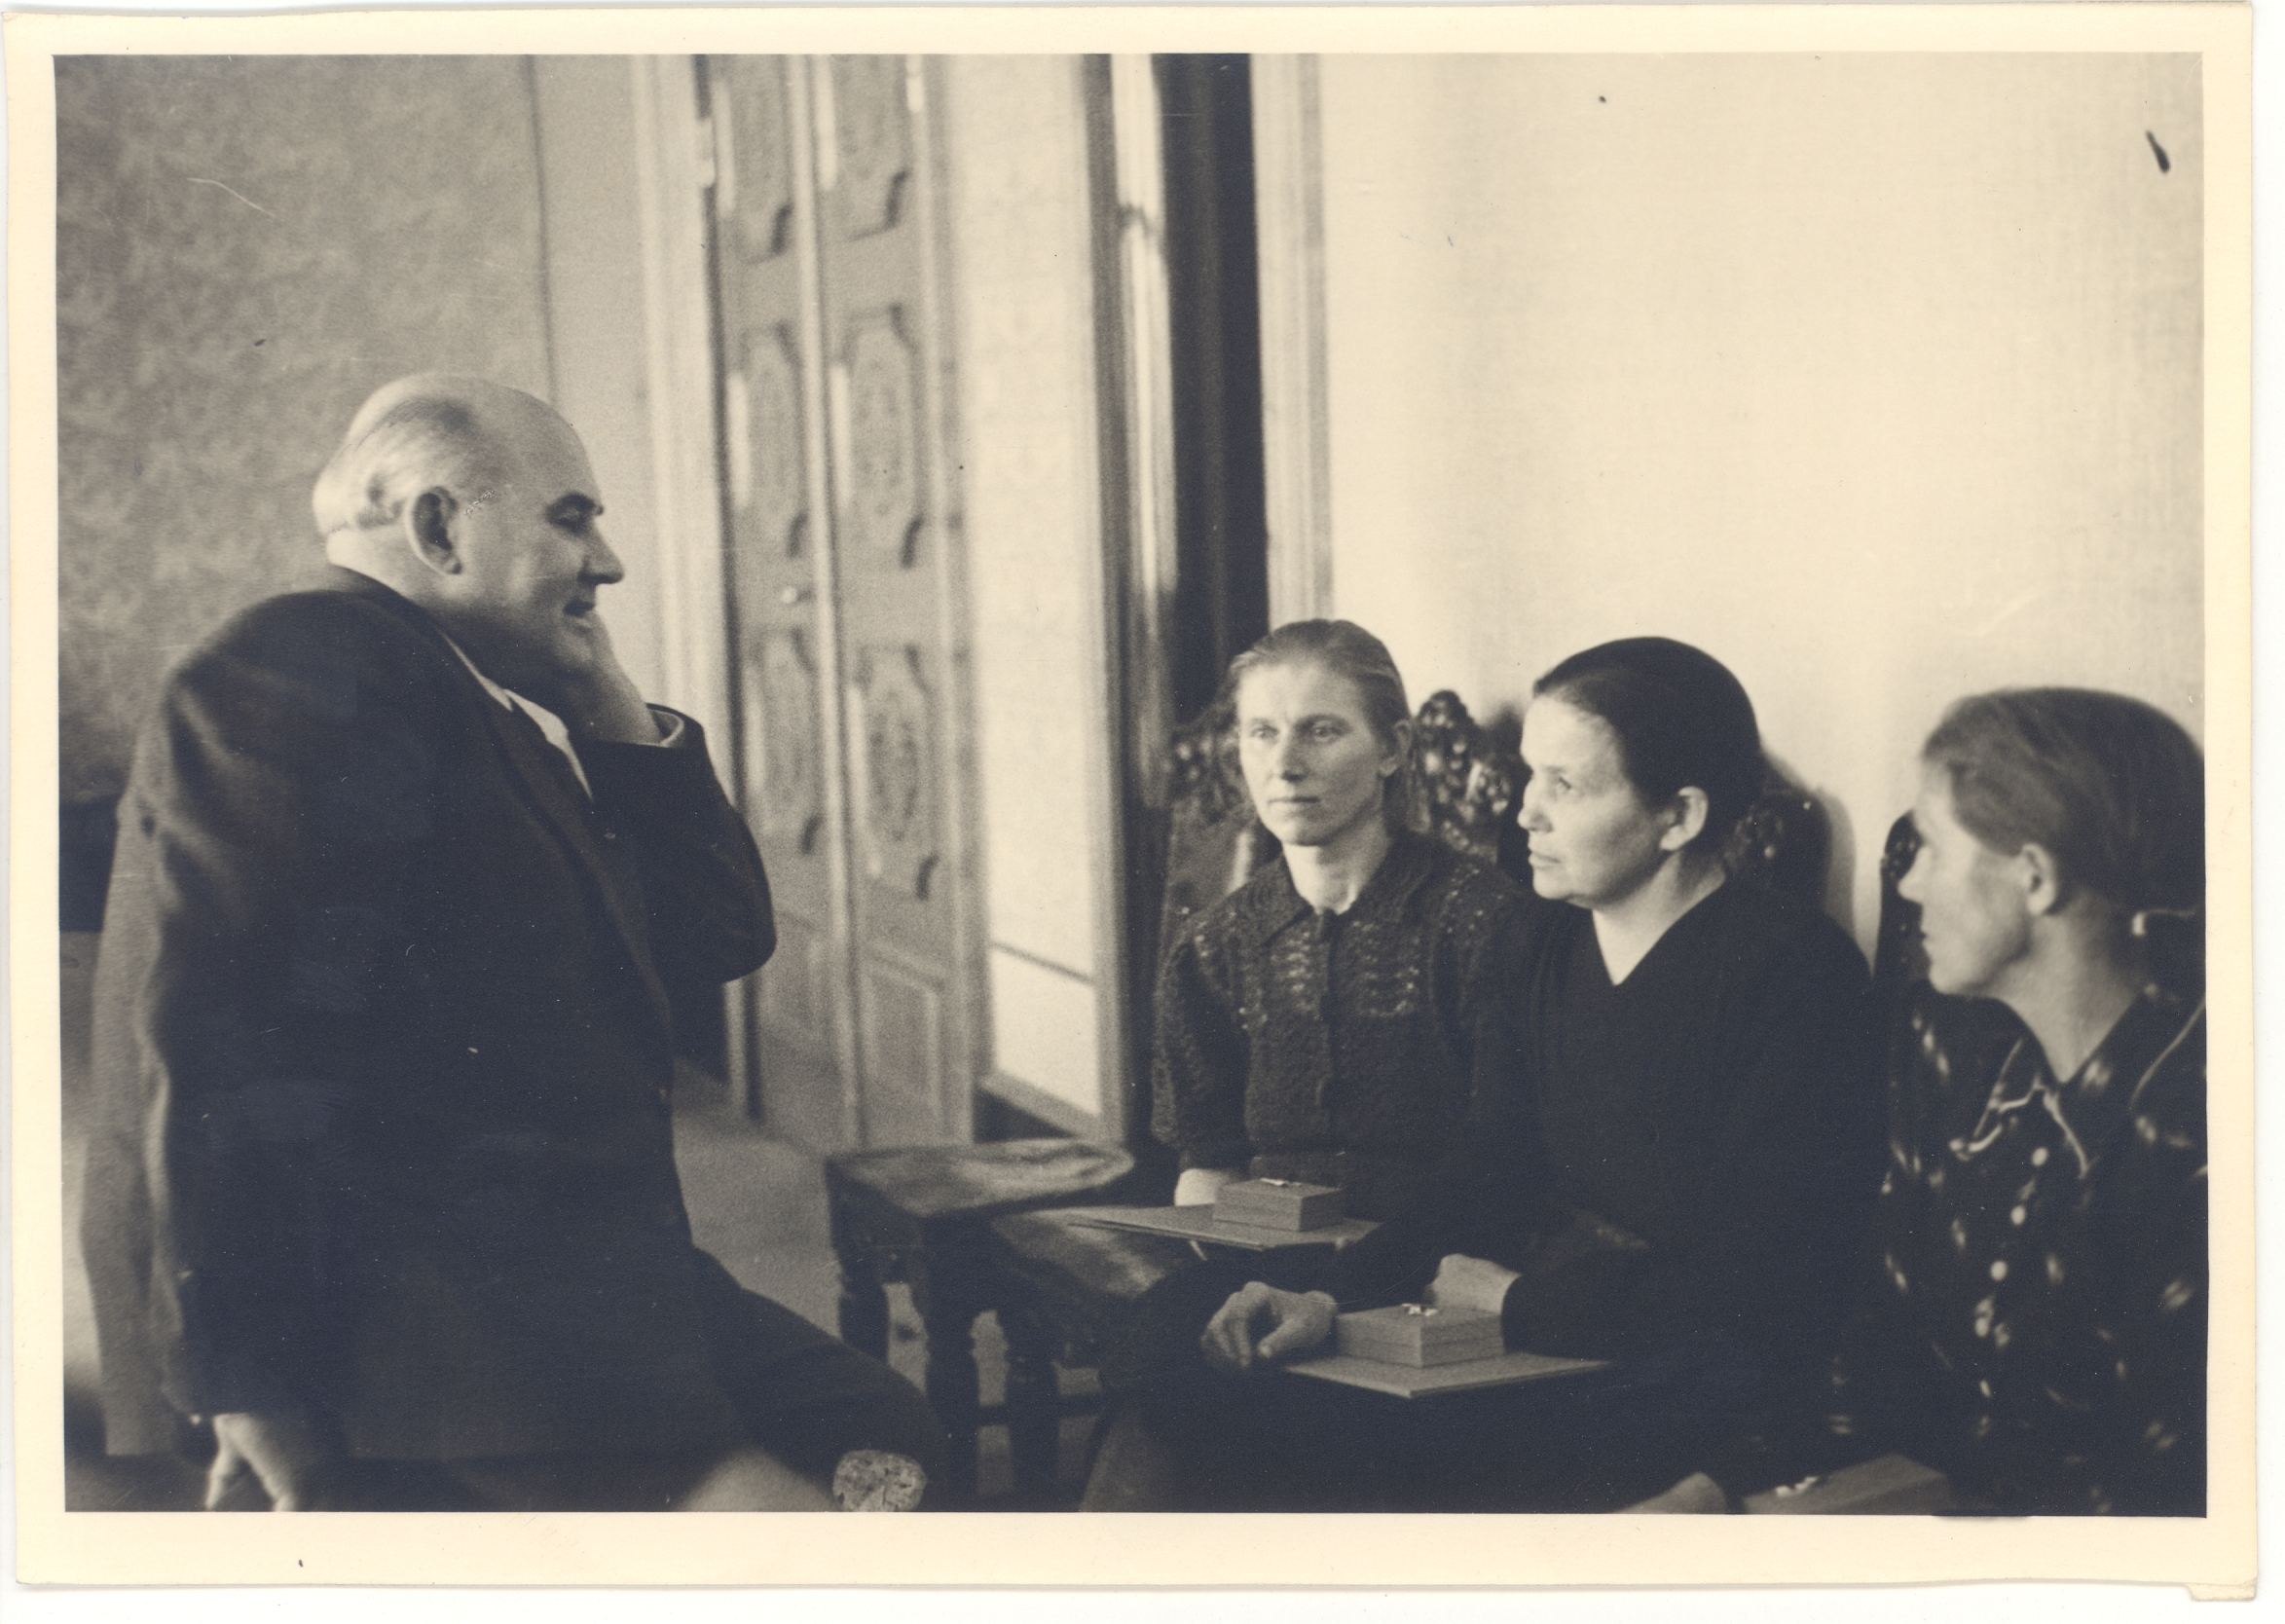 J. Vares-Barbarus conversing with honored mothers 17.09.1946